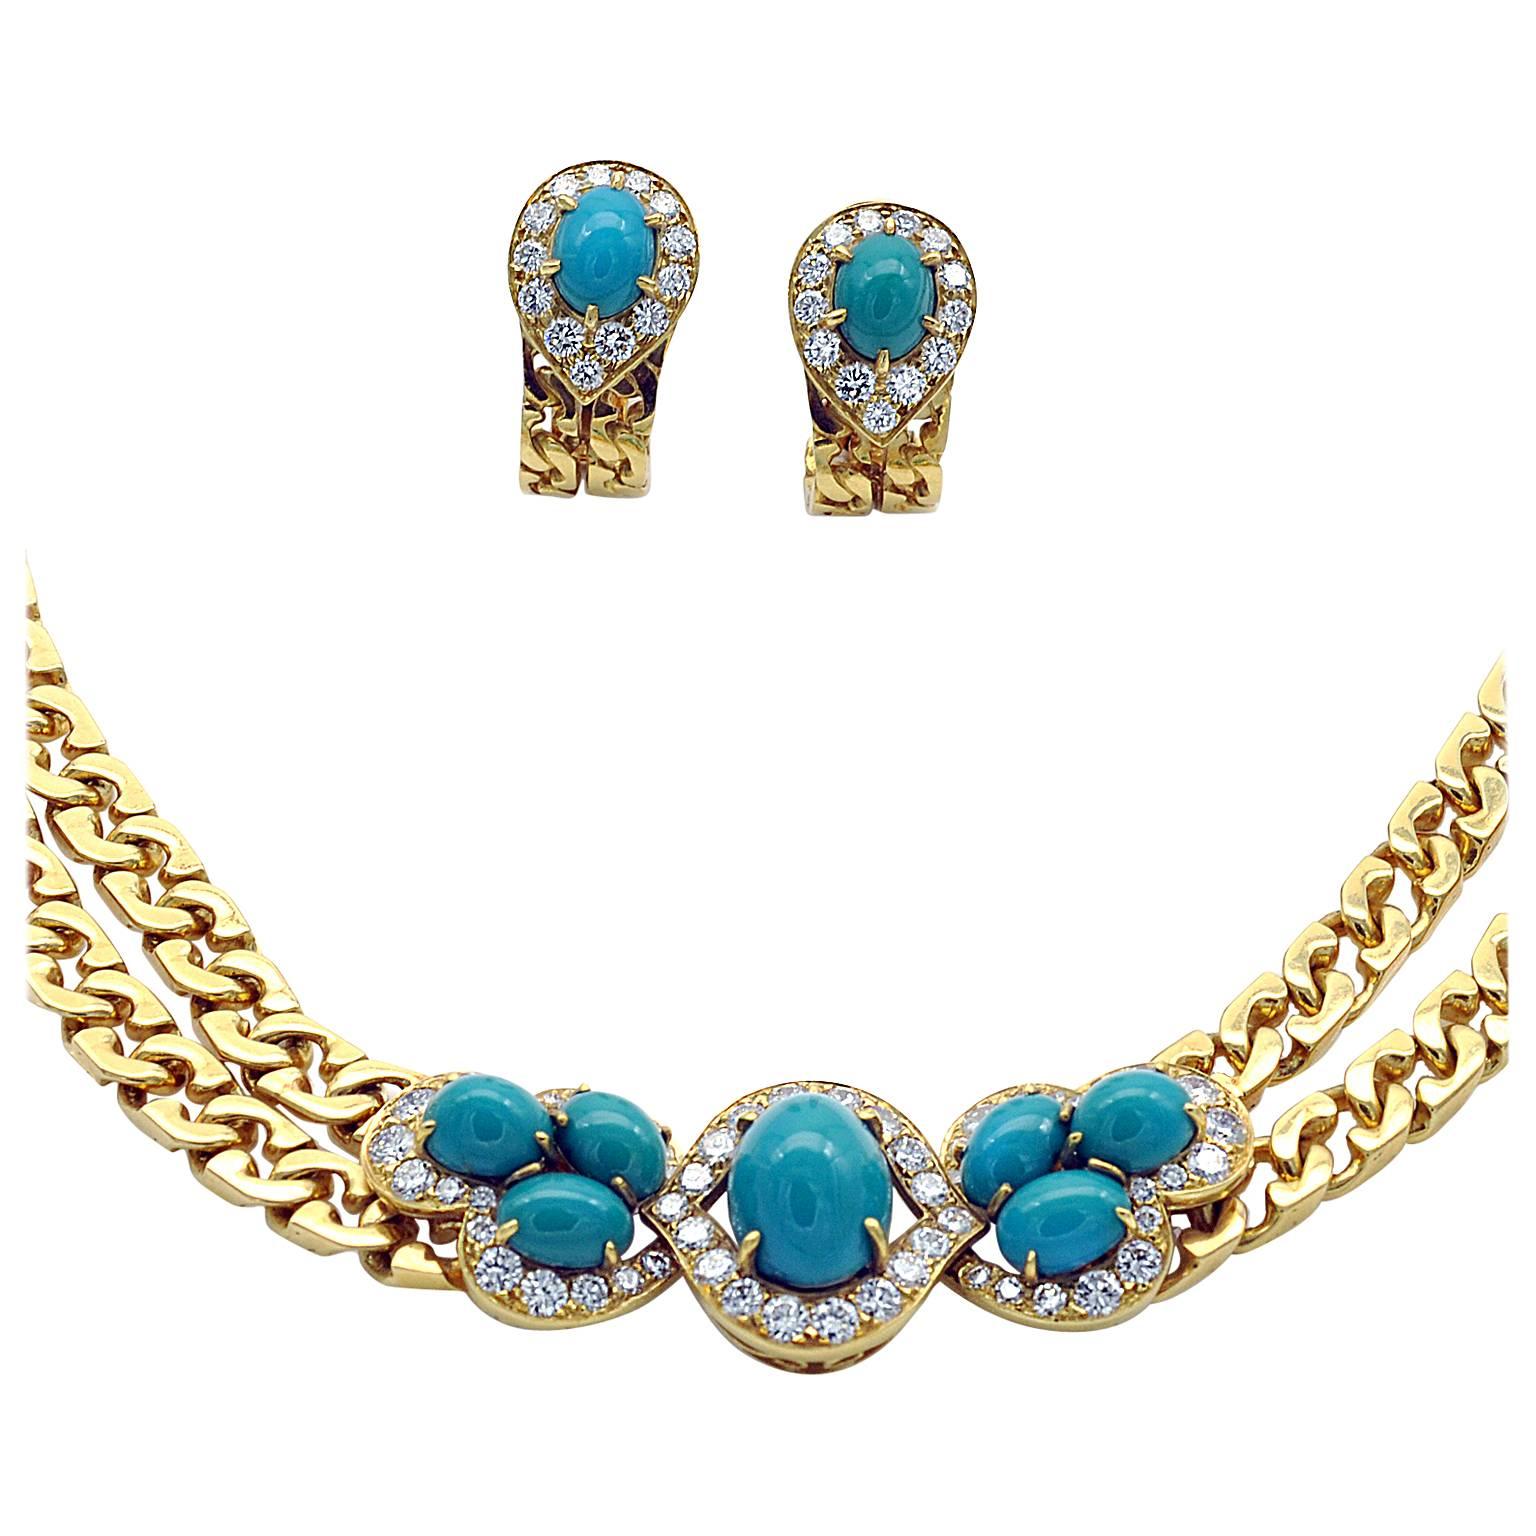 Tabbah Turquoise Diamond Gold Necklace and Earrings Set